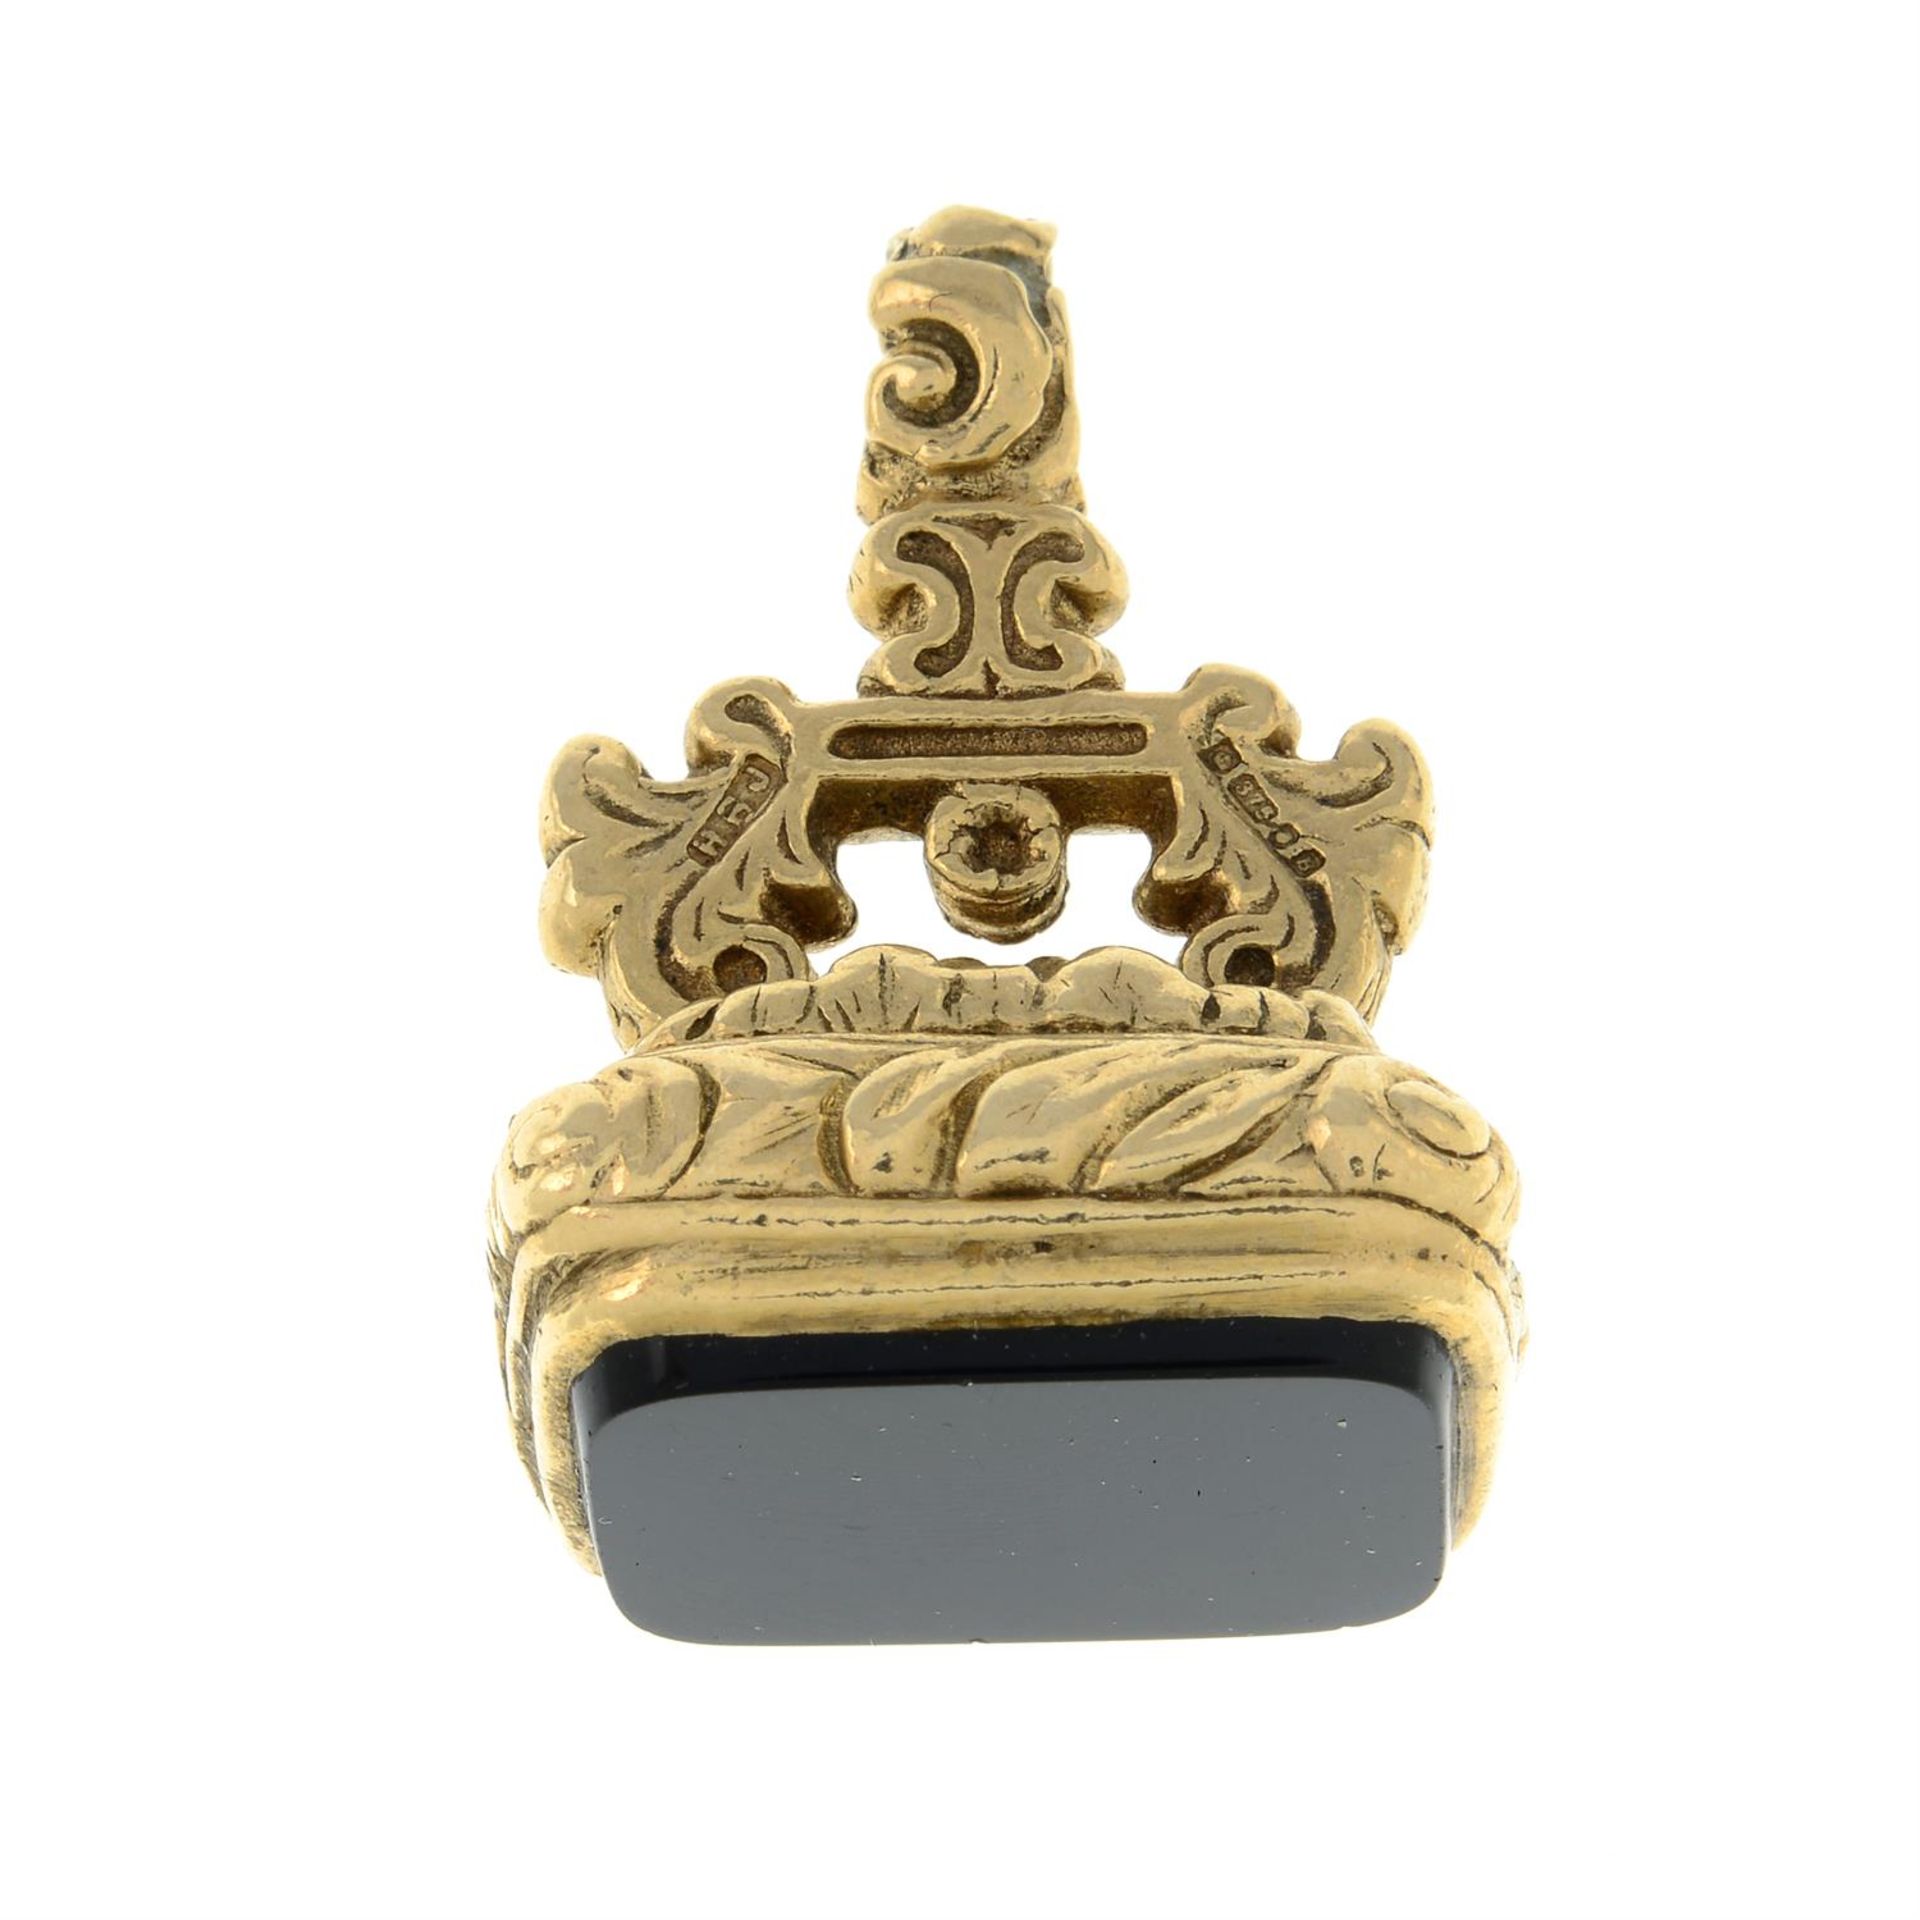 A 1970s 9ct gold onyx fob.